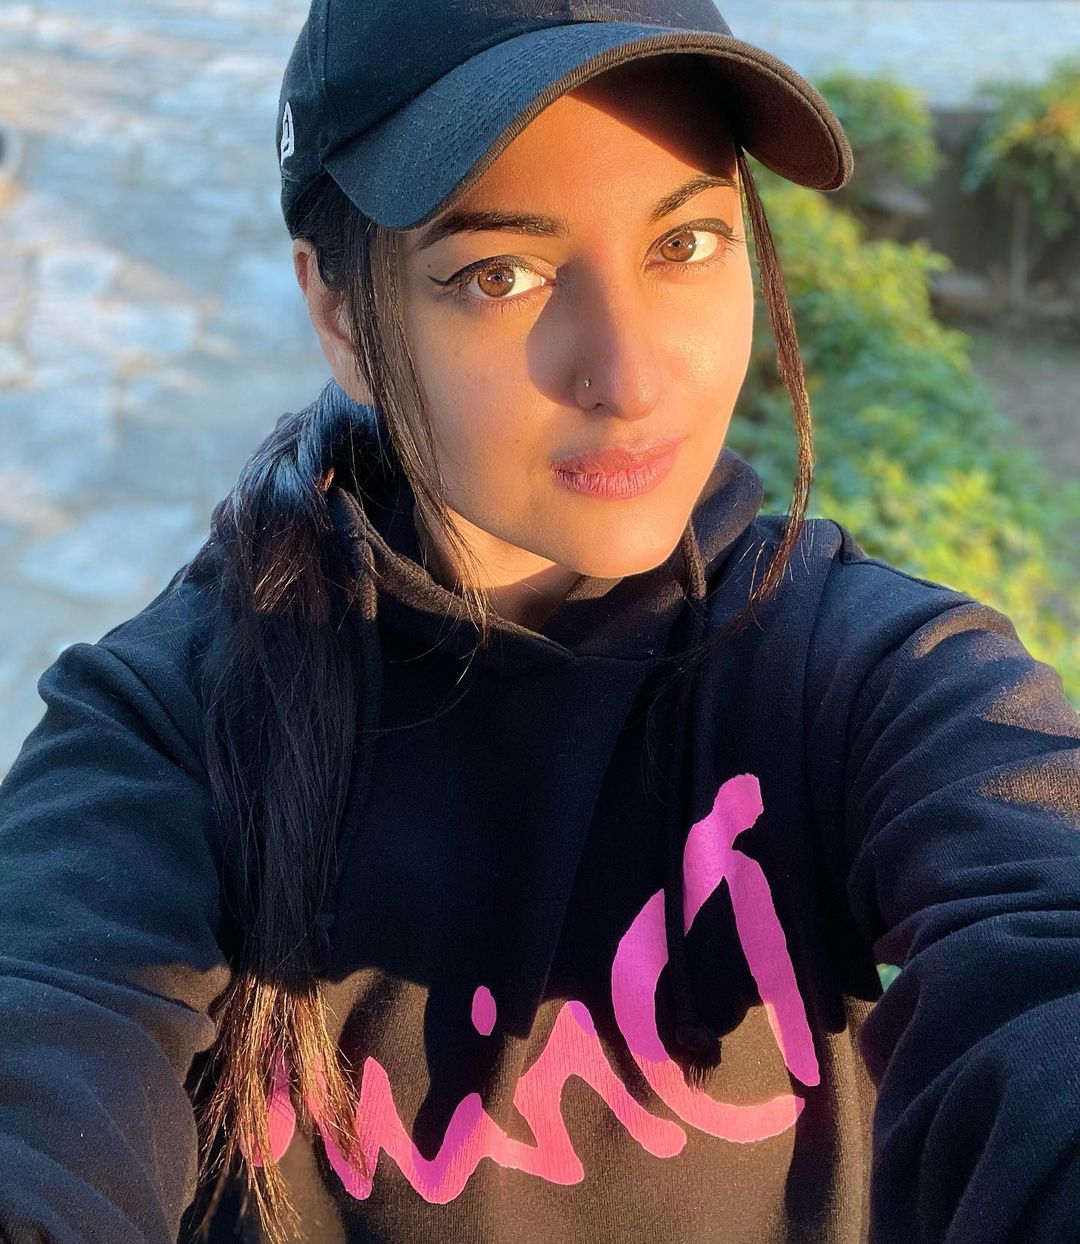 Sonakshi Sinha Shares Flawless Selfie With Fans Check Out The Actress 